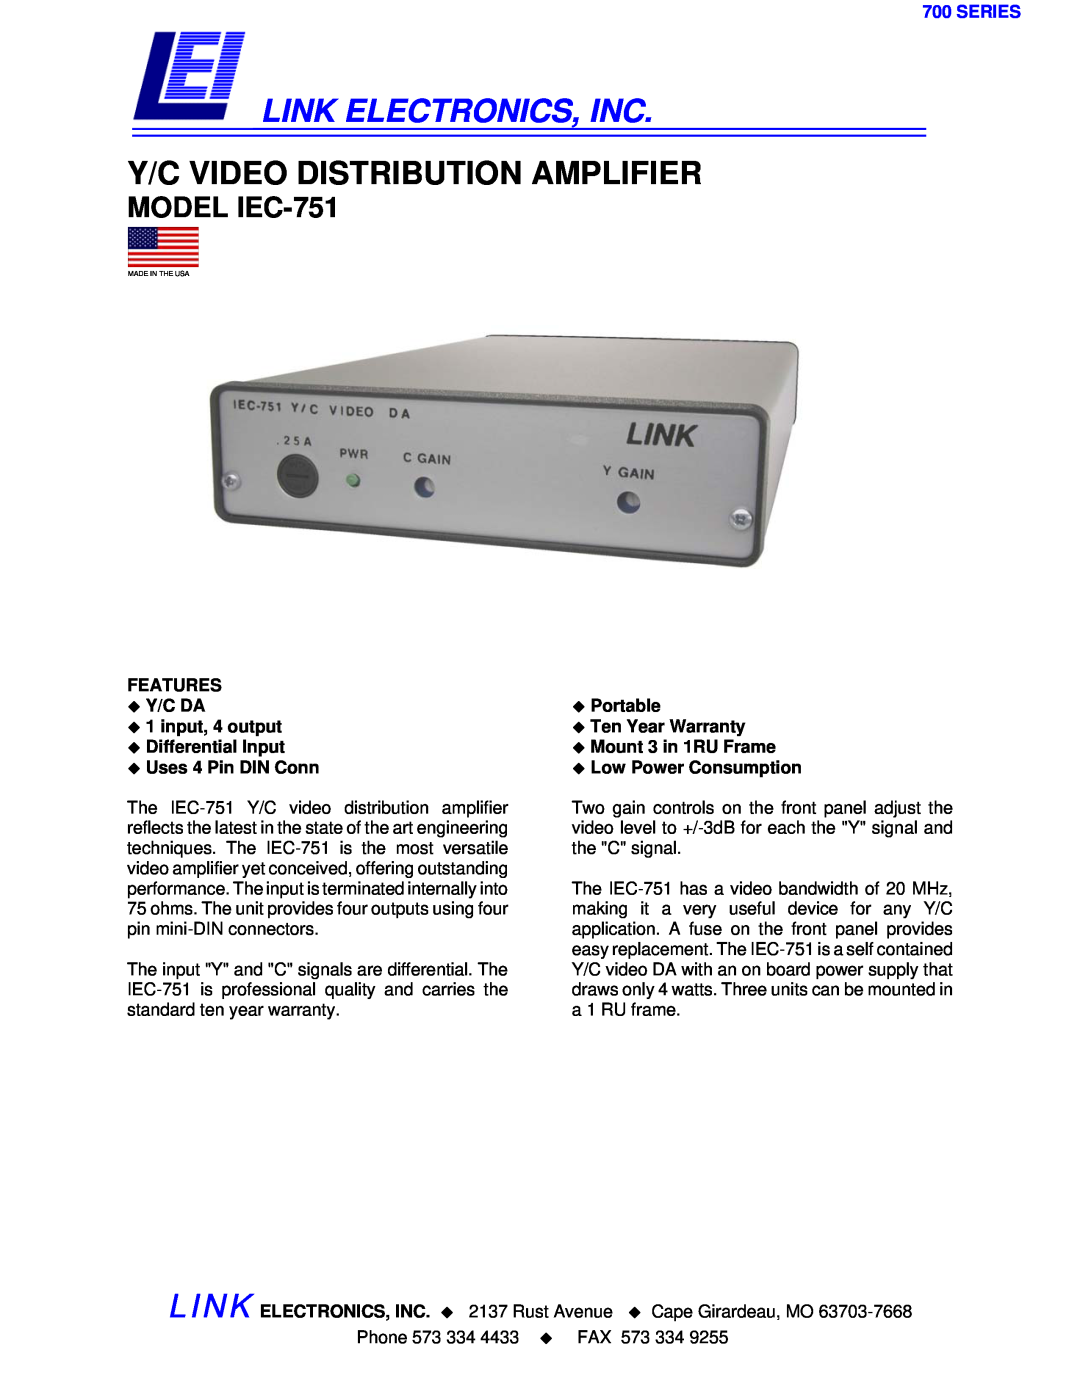 Link electronic IEC-751 warranty FEATURES ‹Y/C DA ‹1 input, 4 output, ‹Differential Input ‹Uses 4 Pin DIN Conn, Series 